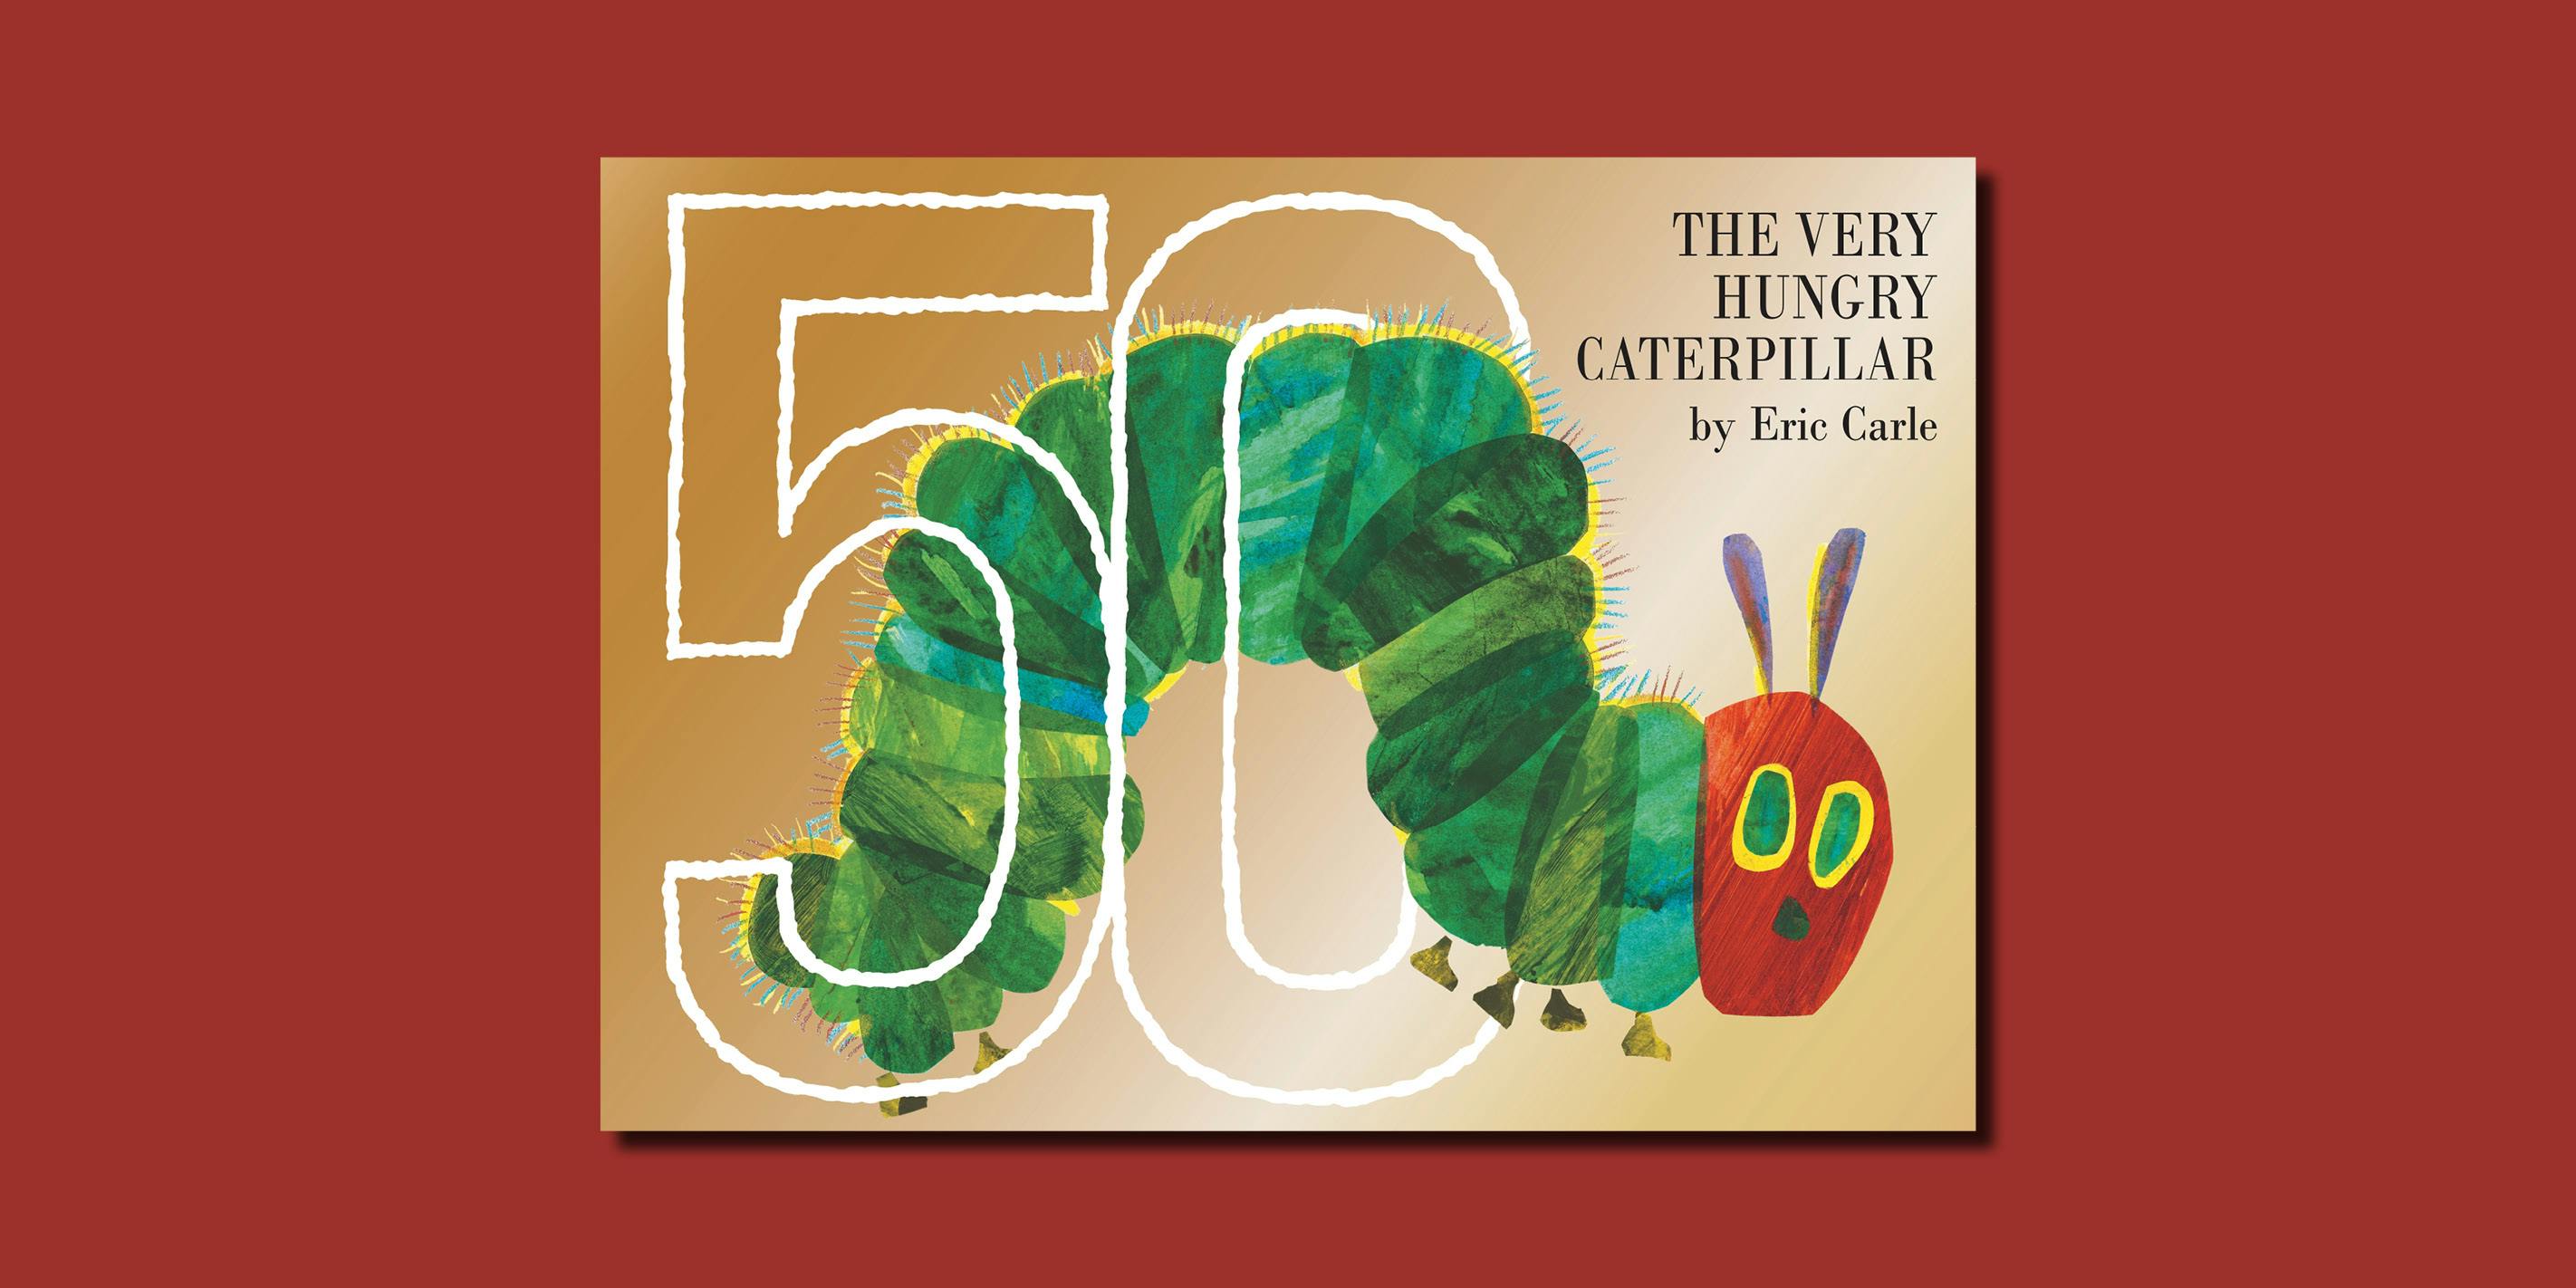 Explore the great outdoors with the Very Hungry Caterpillar!